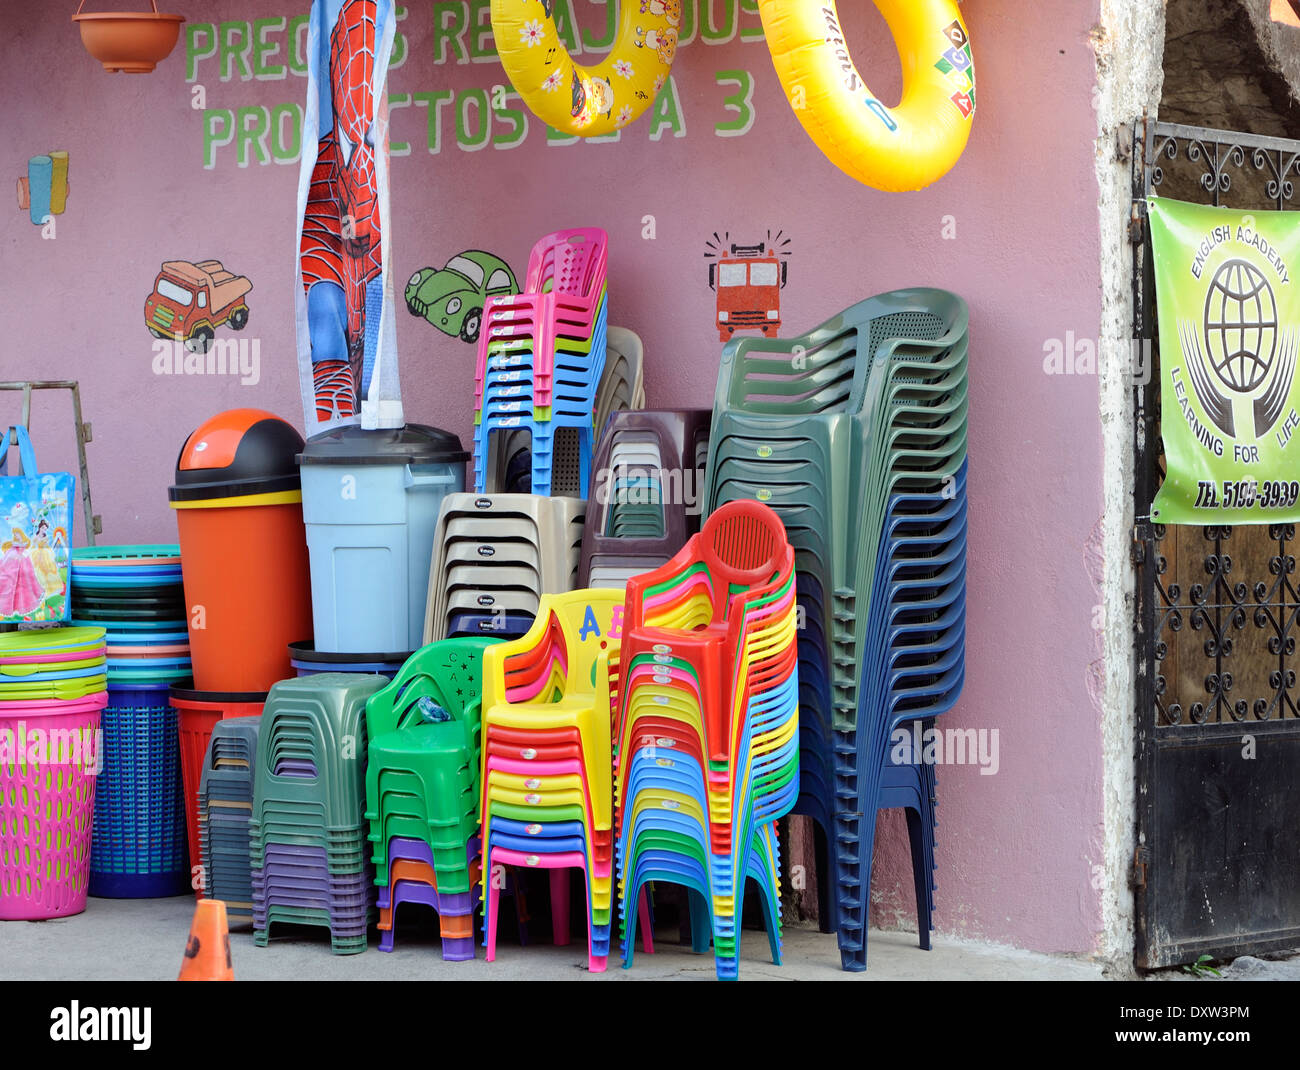 Plastic chairs and bins for sale outside a store. Panajachel, Republic of Guatemala. Stock Photo